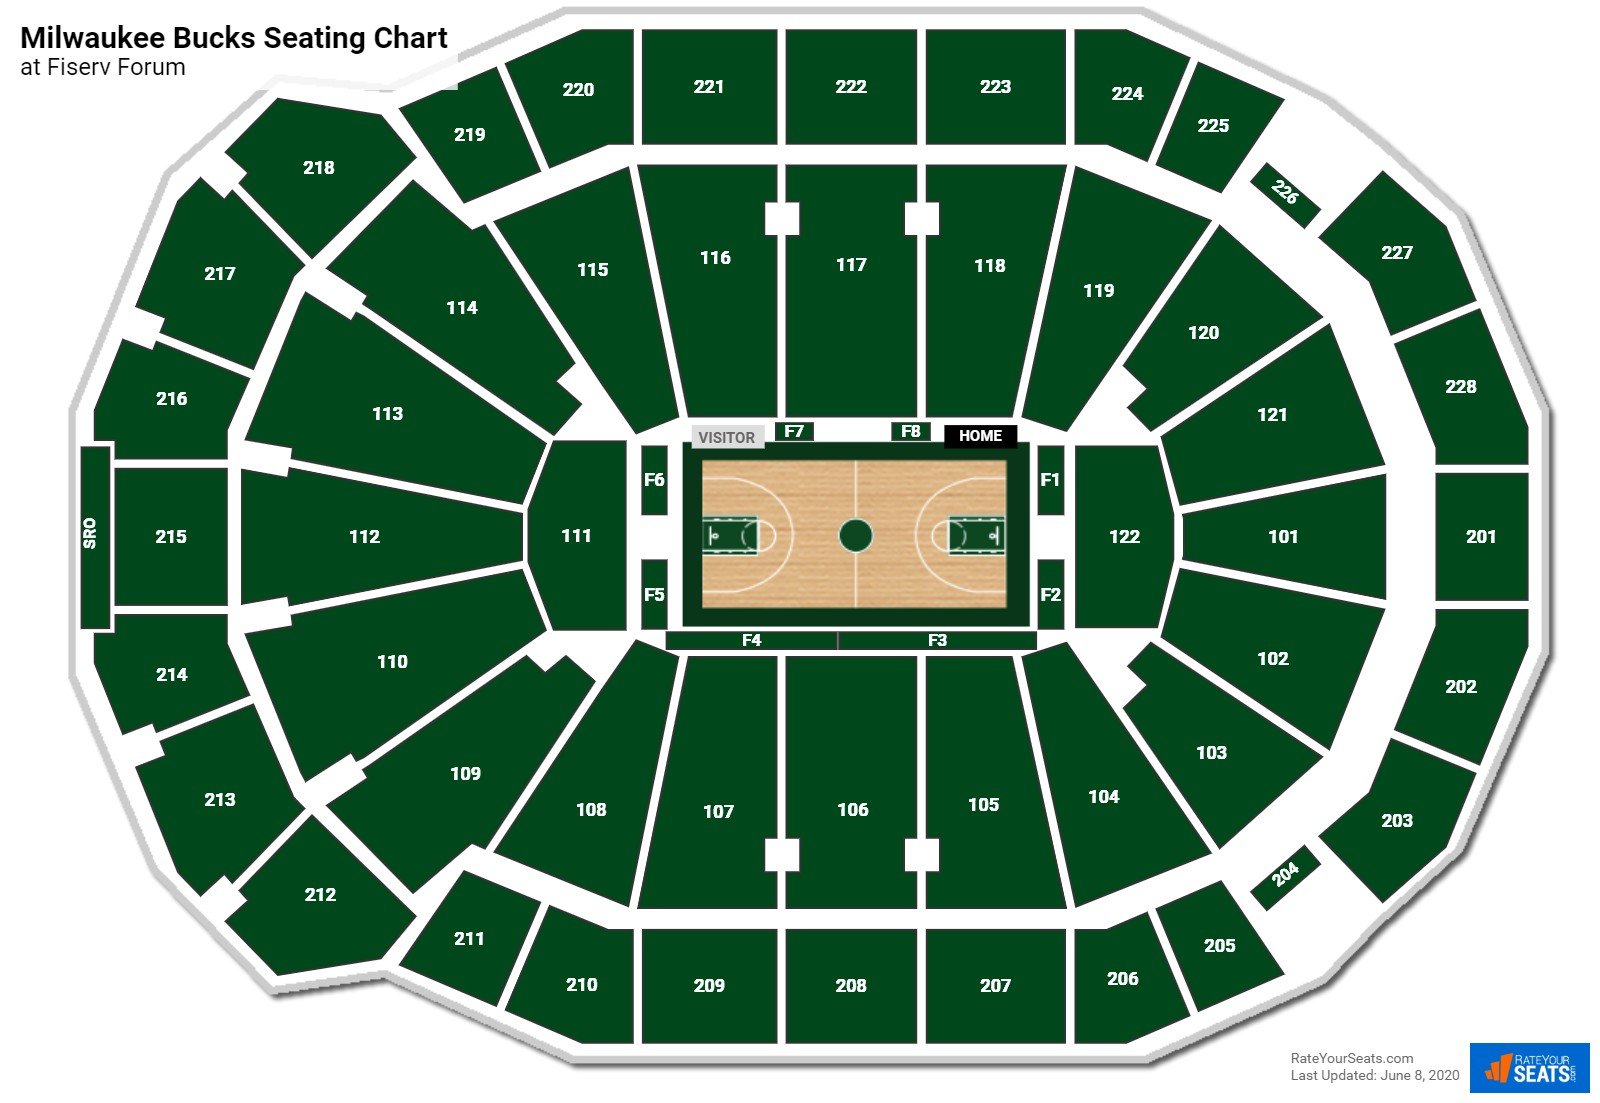 Fiserv Forum Seating Chart With Seat Numbers